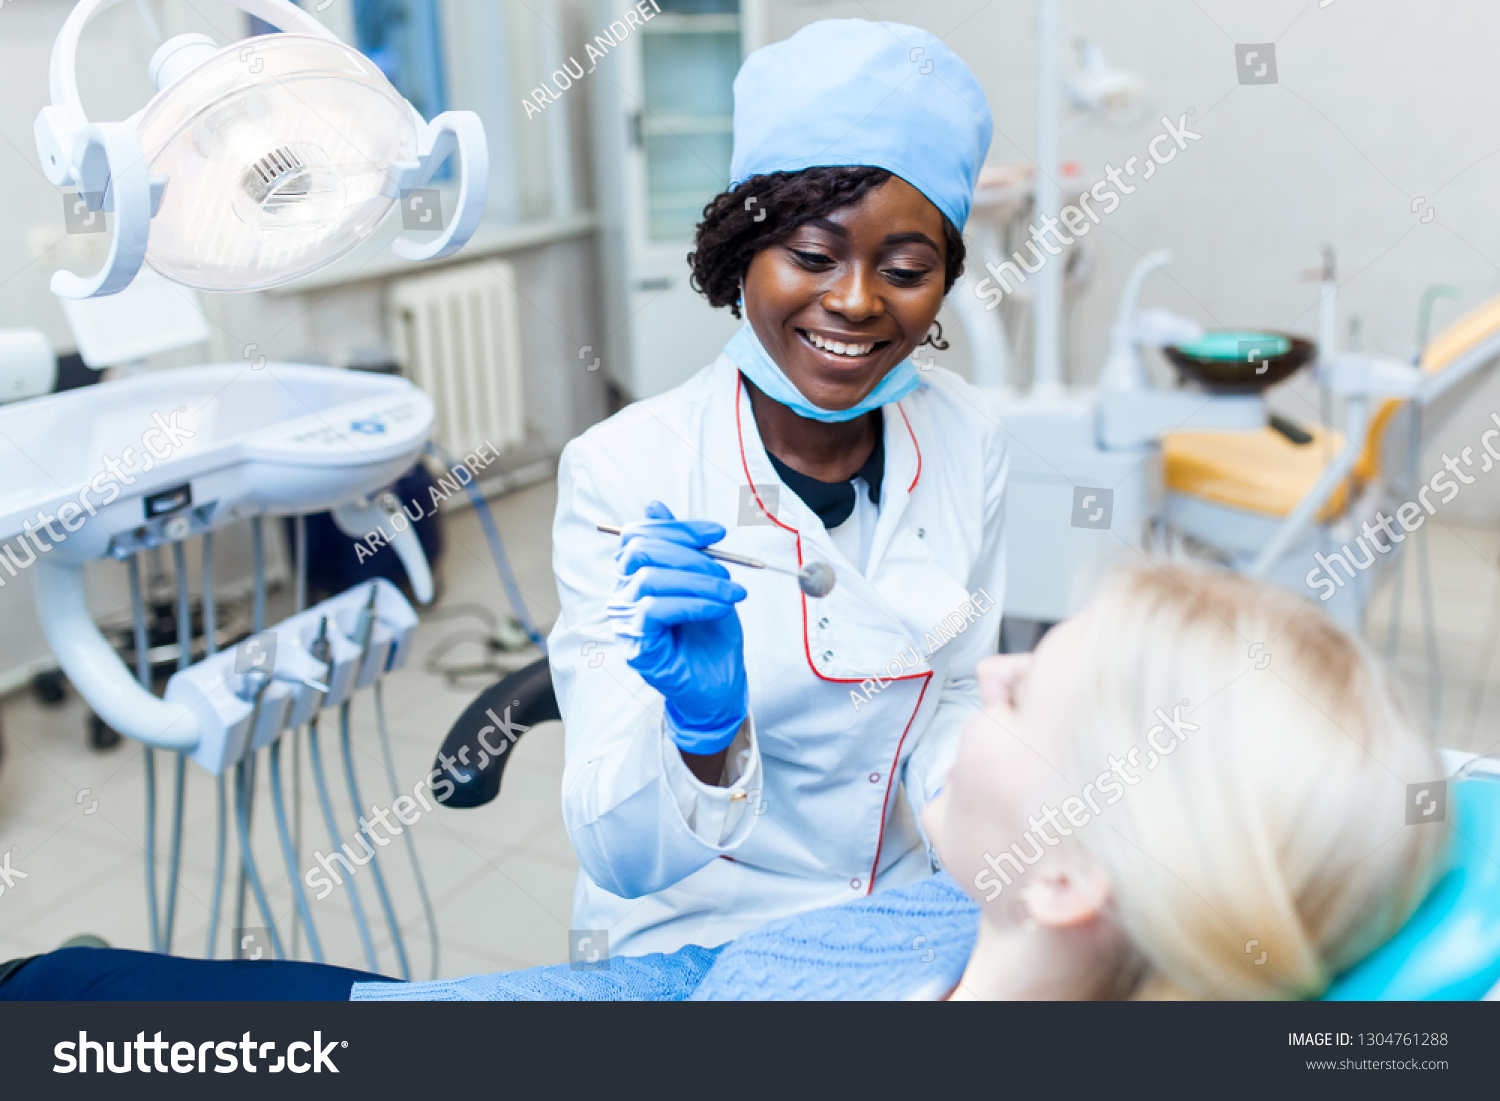 Female black dentist in dental office talking with female patient and preparing for treatment. Modern medical equipment. Dental clinic concept #1304761288